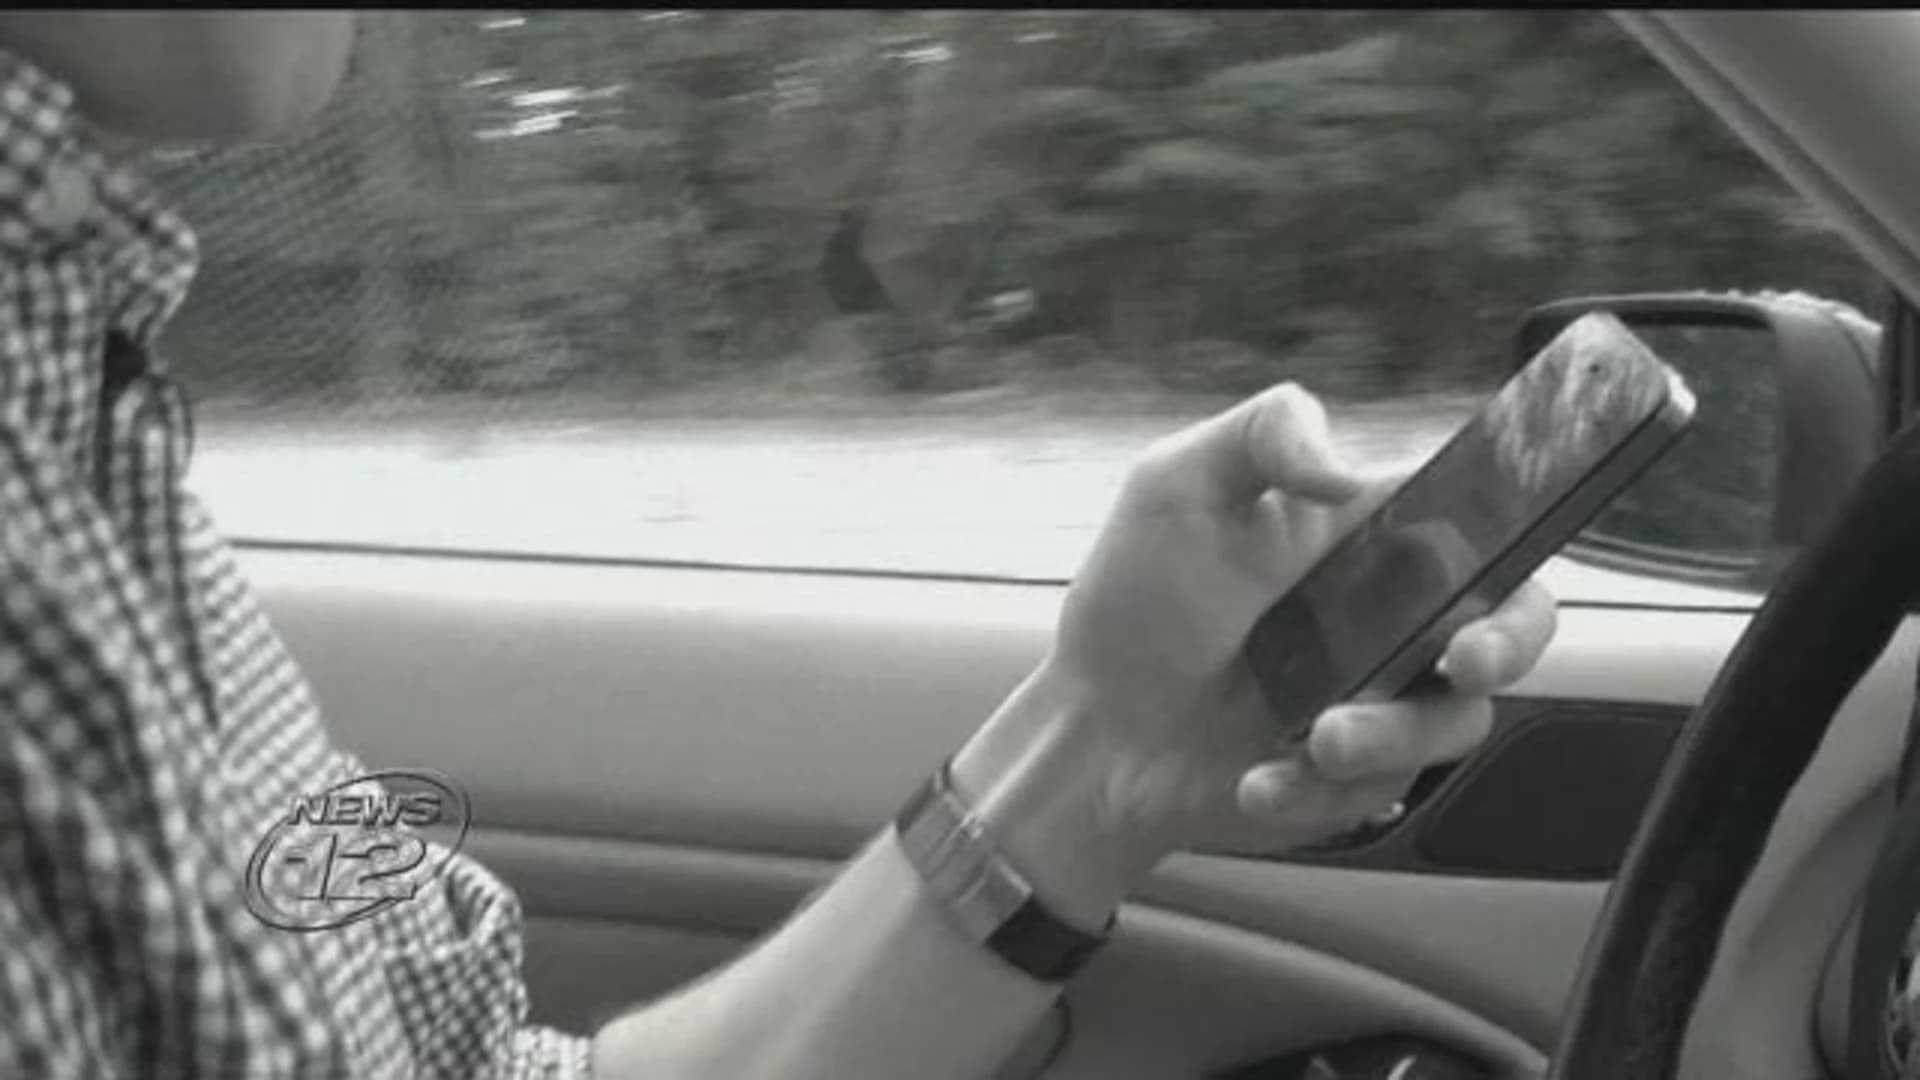 New York eyes use of 'textalyzer' to crack down on distracted driving